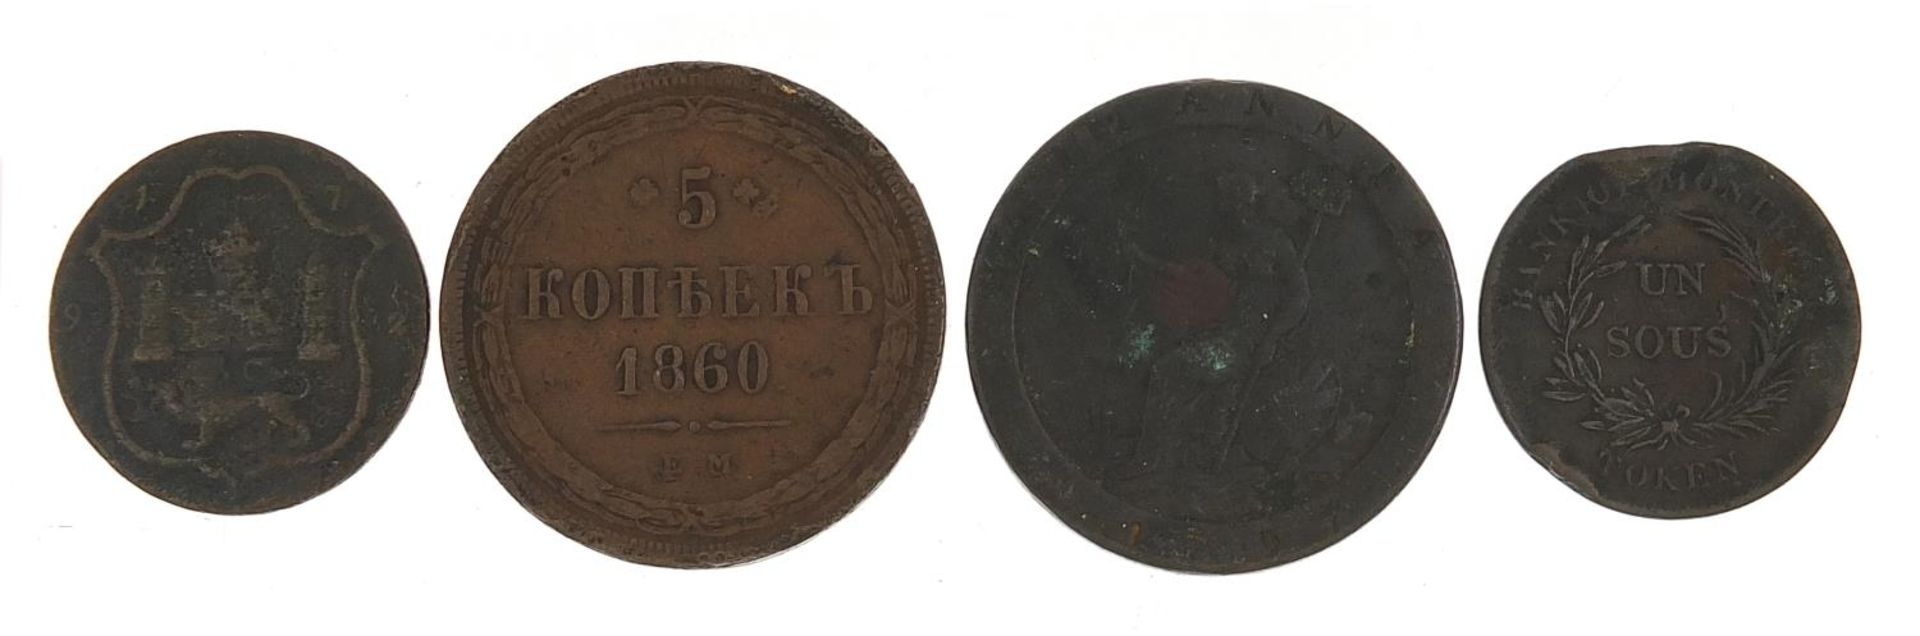 Antique coinage including a 1797 halfpenny